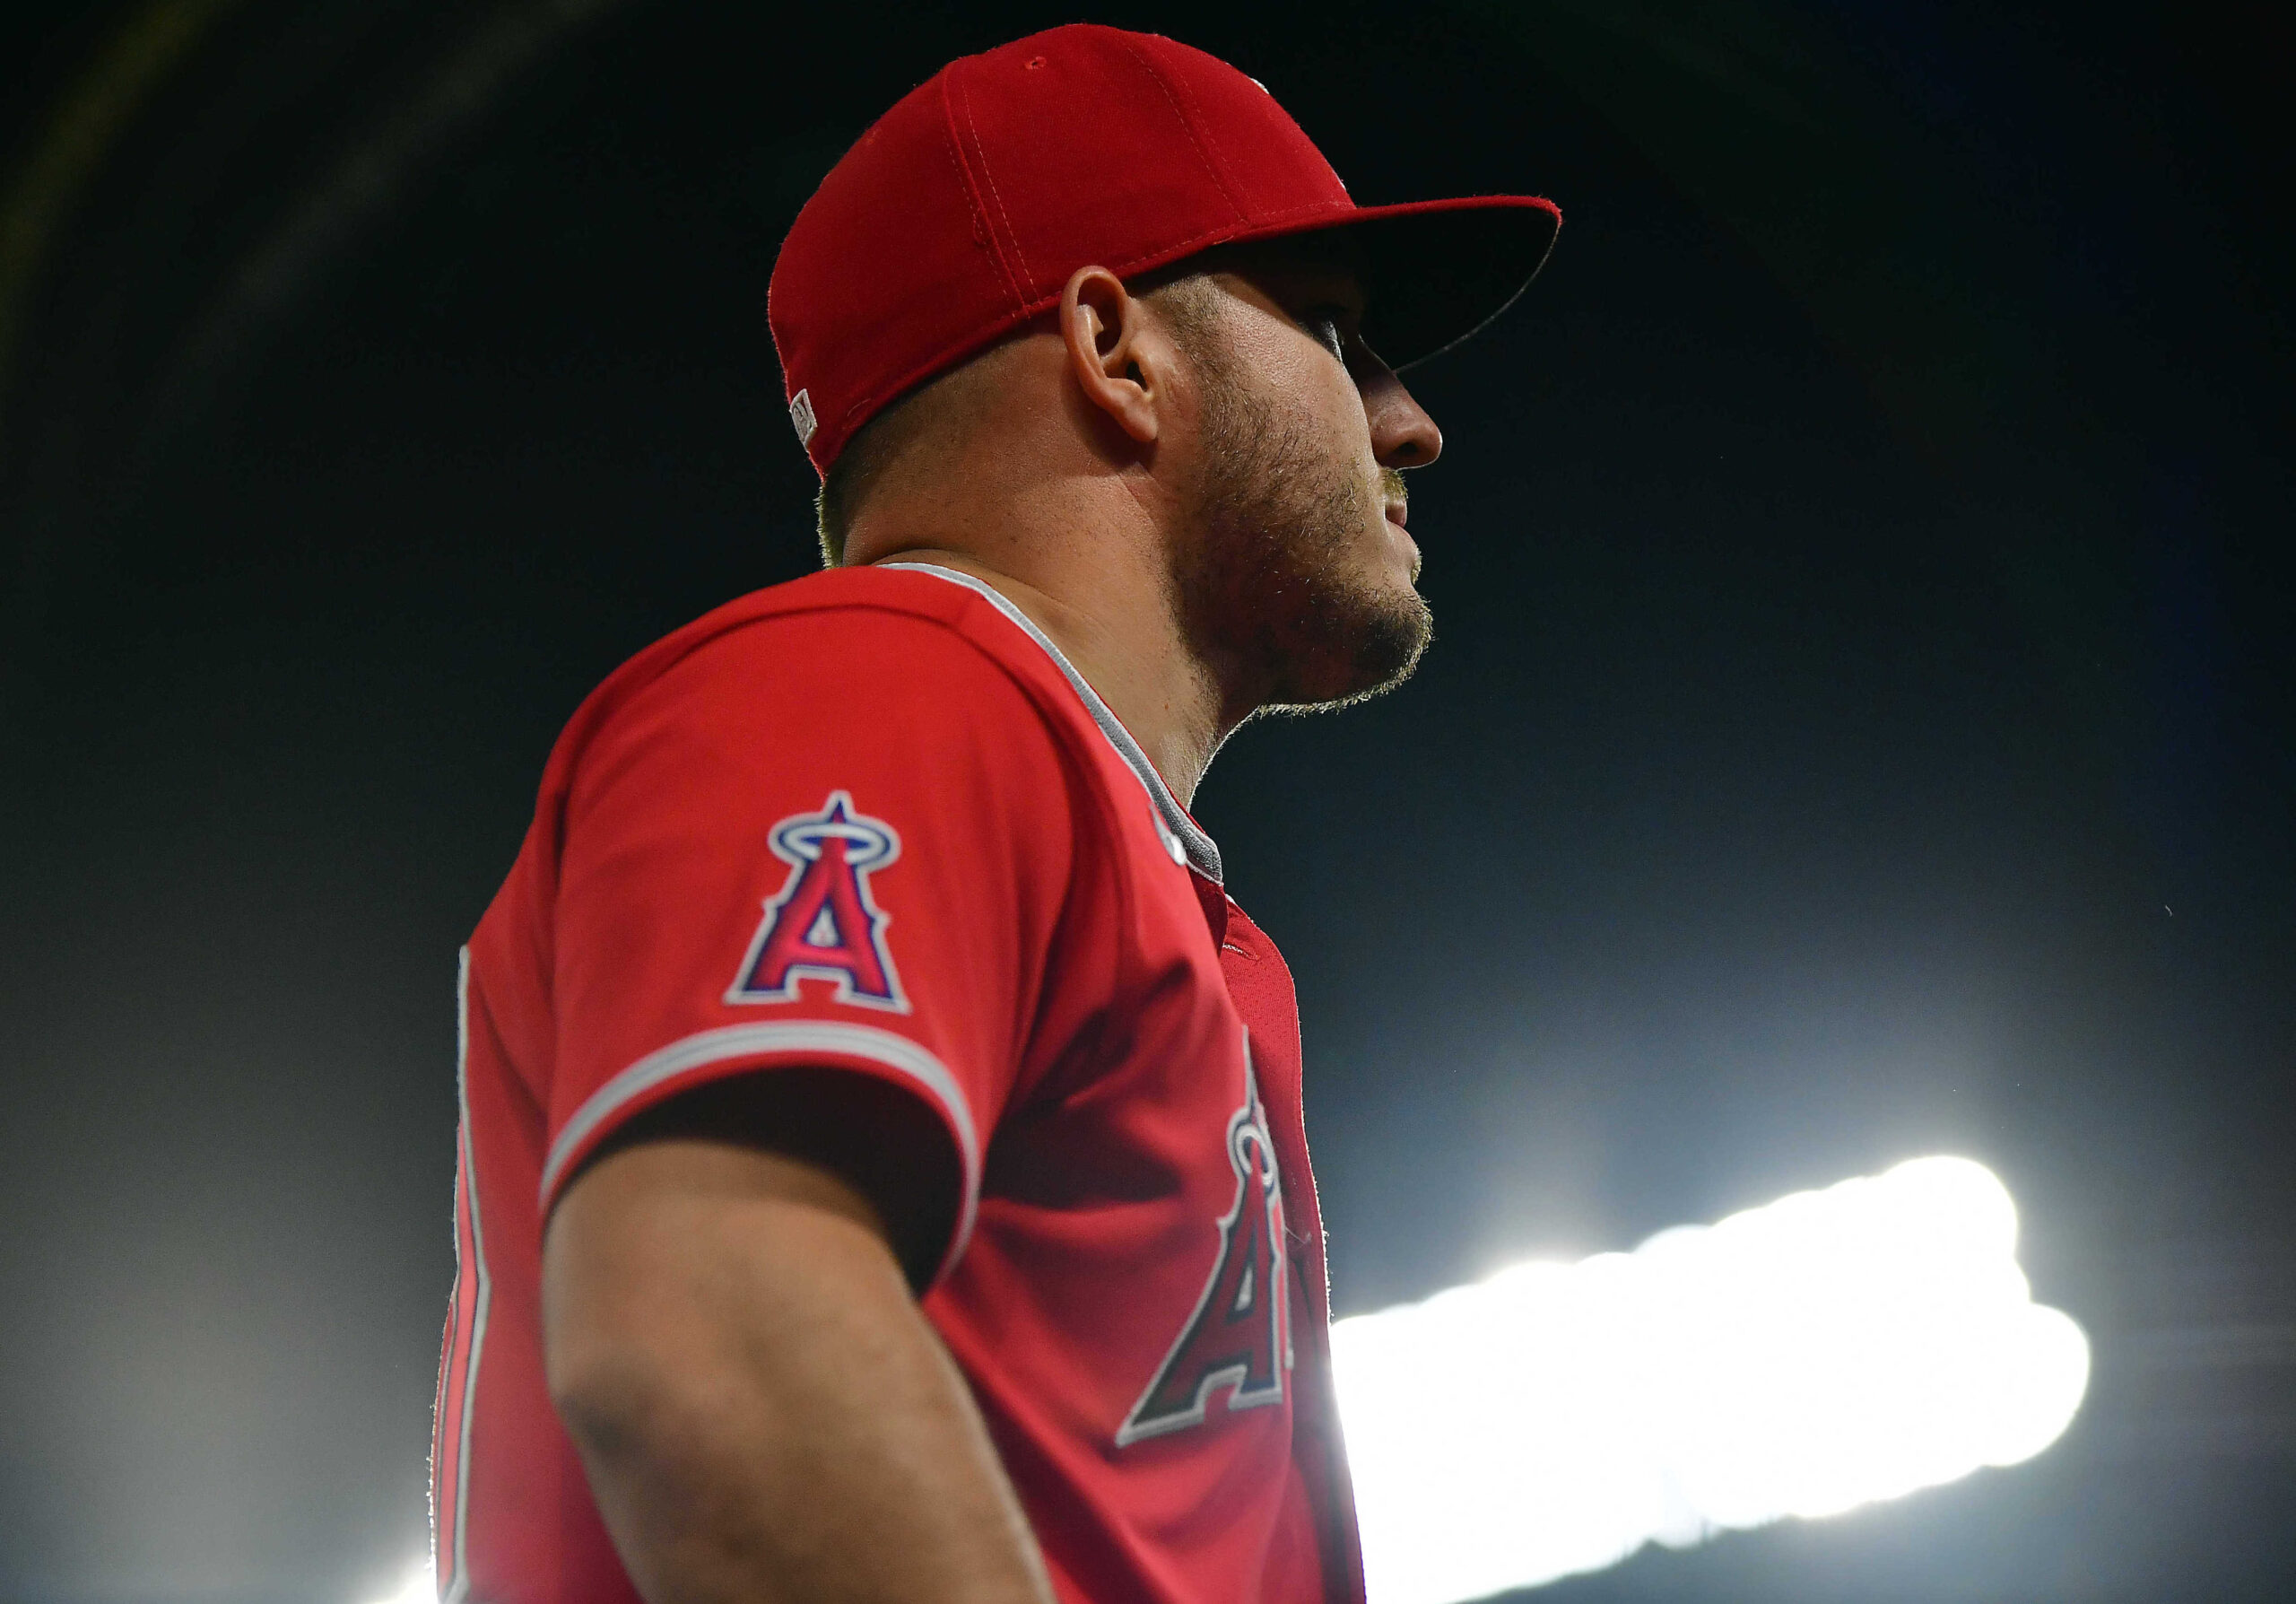 Mike Trout Was Already 'A Different Animal' Before Joining Angels